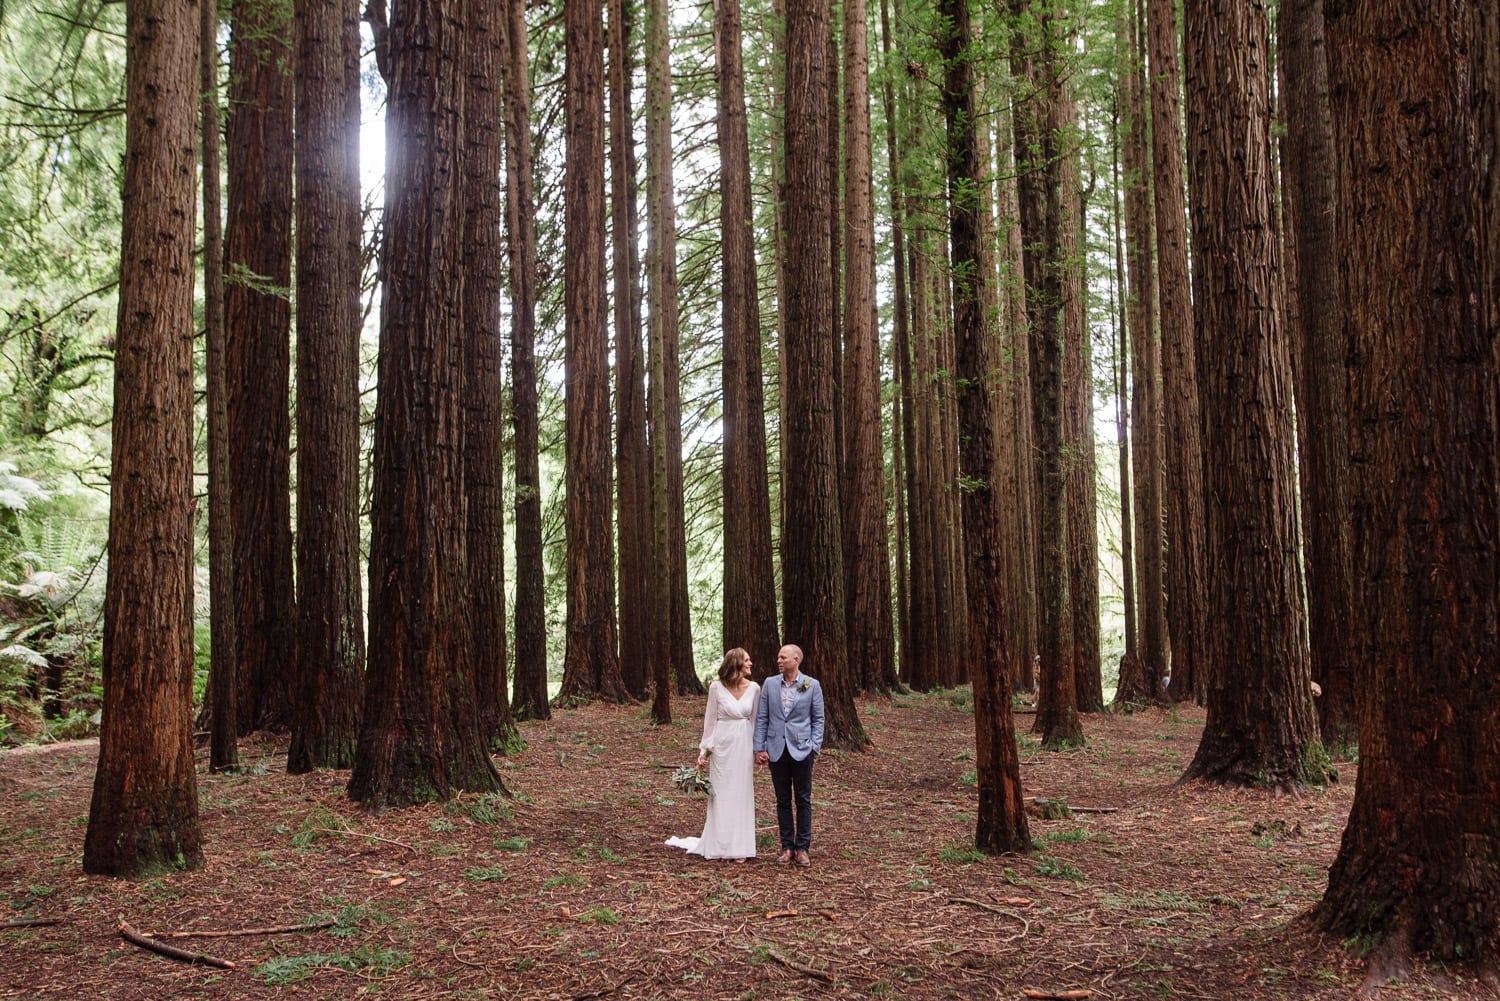 The Otways Redwood Plantation is an amazing spot for a wedding